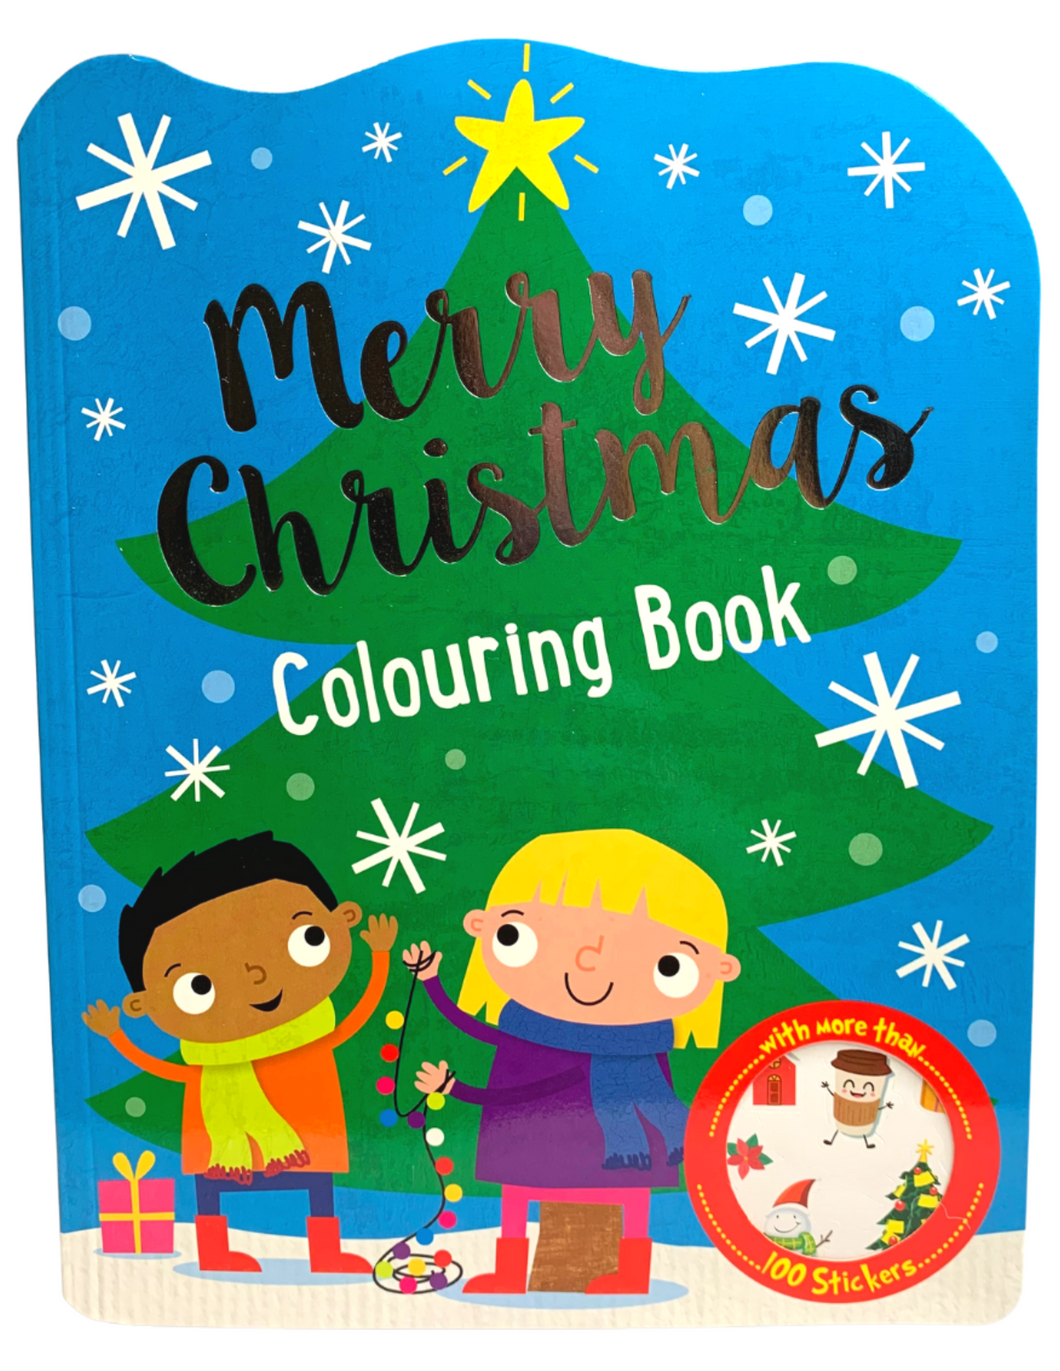 Merry Christmas Colouring Book (with more than 100 stickers!)